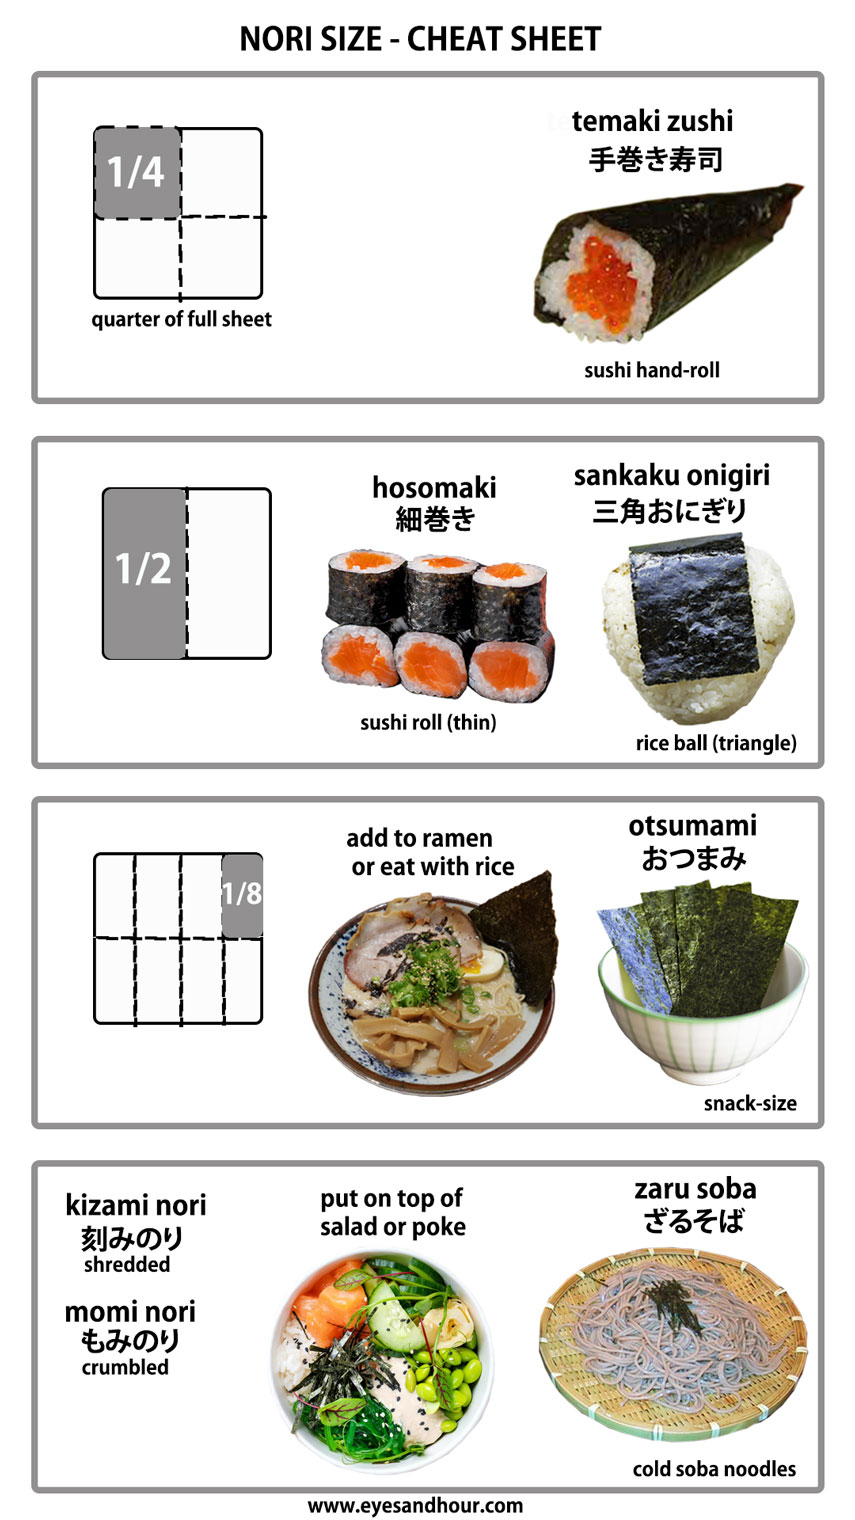 nori sheet size chart for making different Japanese foods